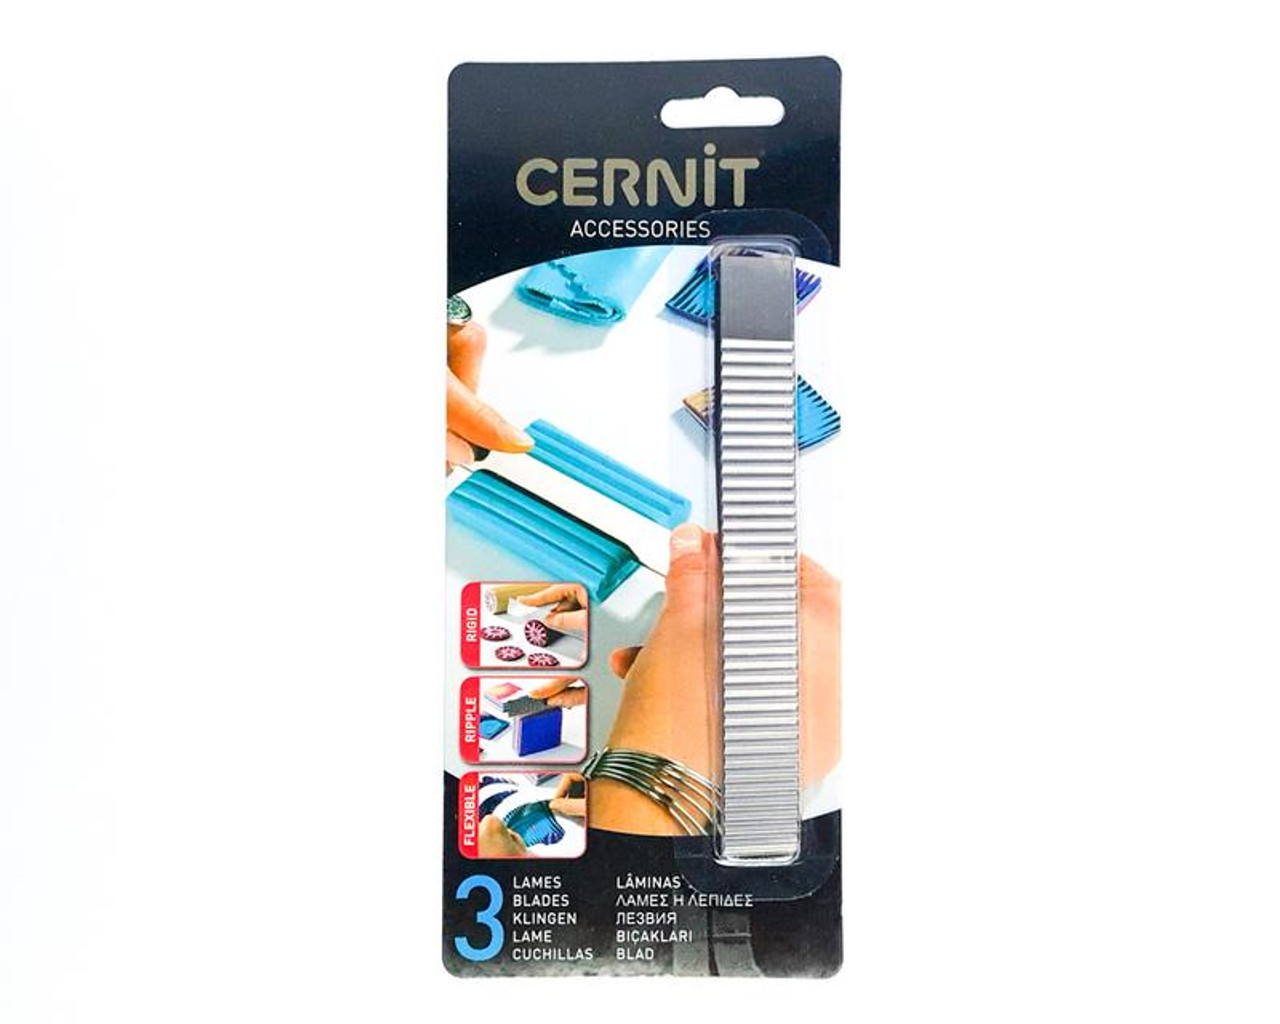 Does anyone know anything about Cernit Gel?? Does it work like